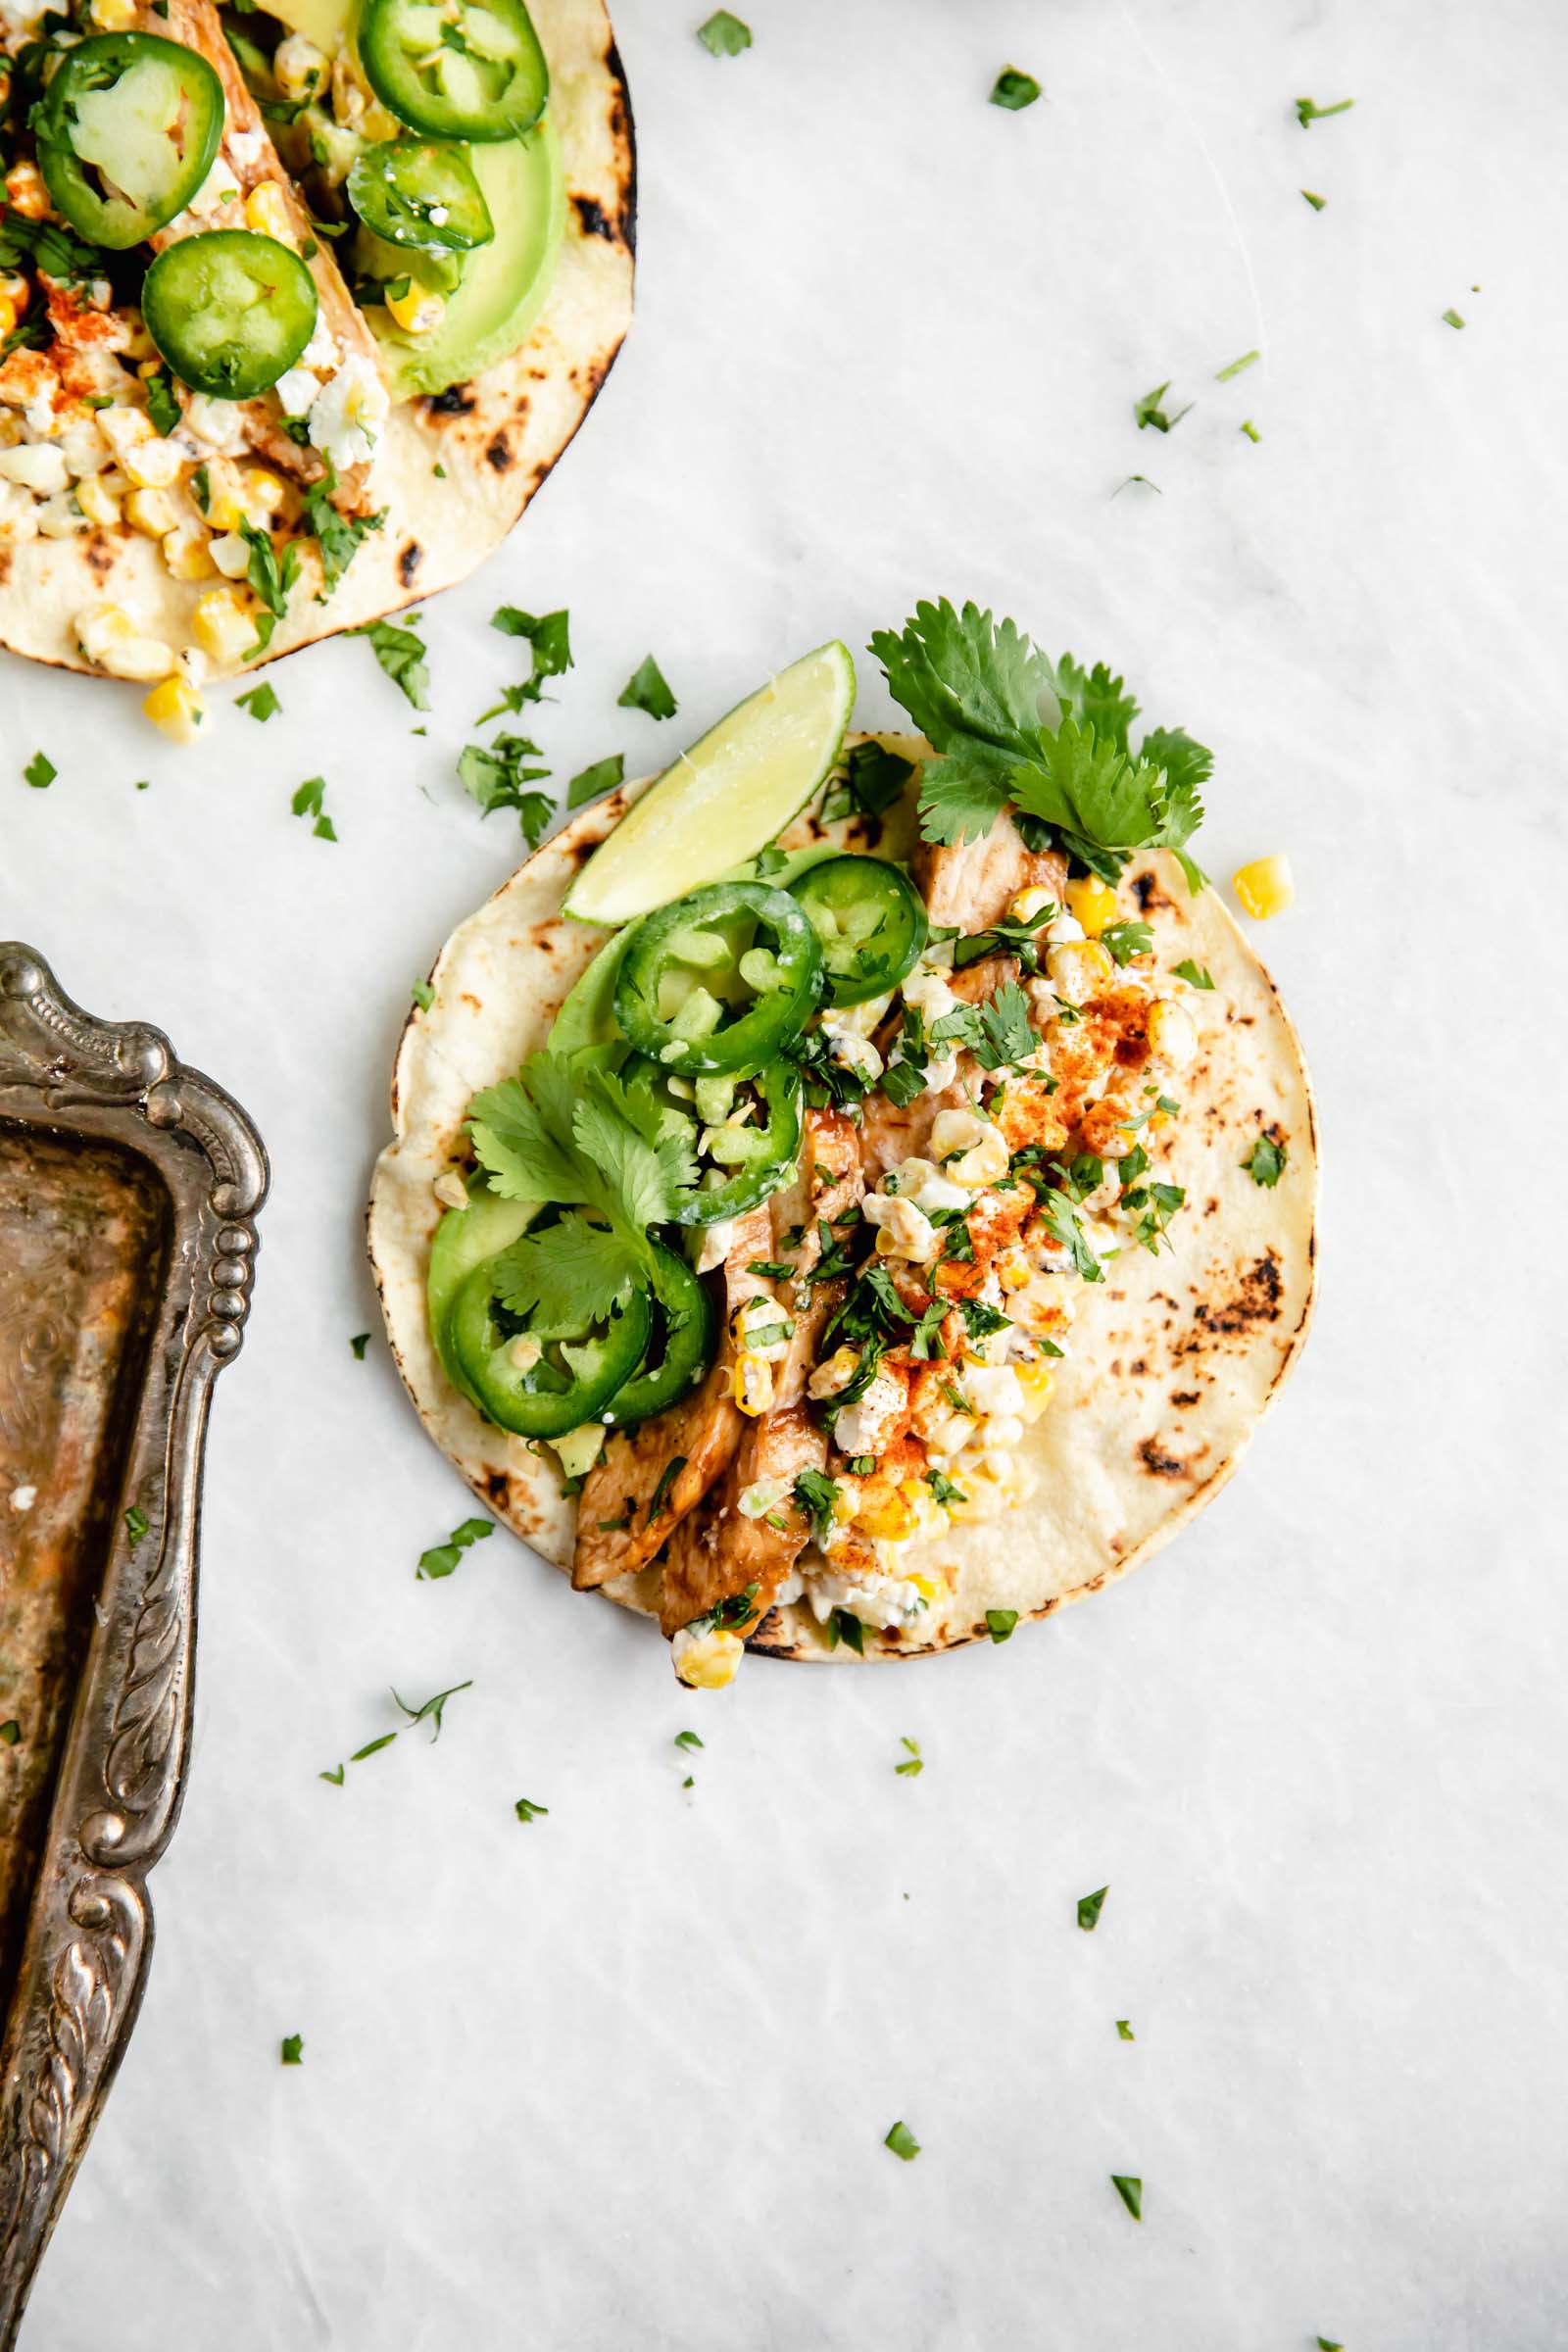 Kicking off Summer Taco Tuesdays with BBQ Chicken Mexican Street Corn tacos loaded with crema, cotija cheese, avocado, and fresh corn. Sign me up!